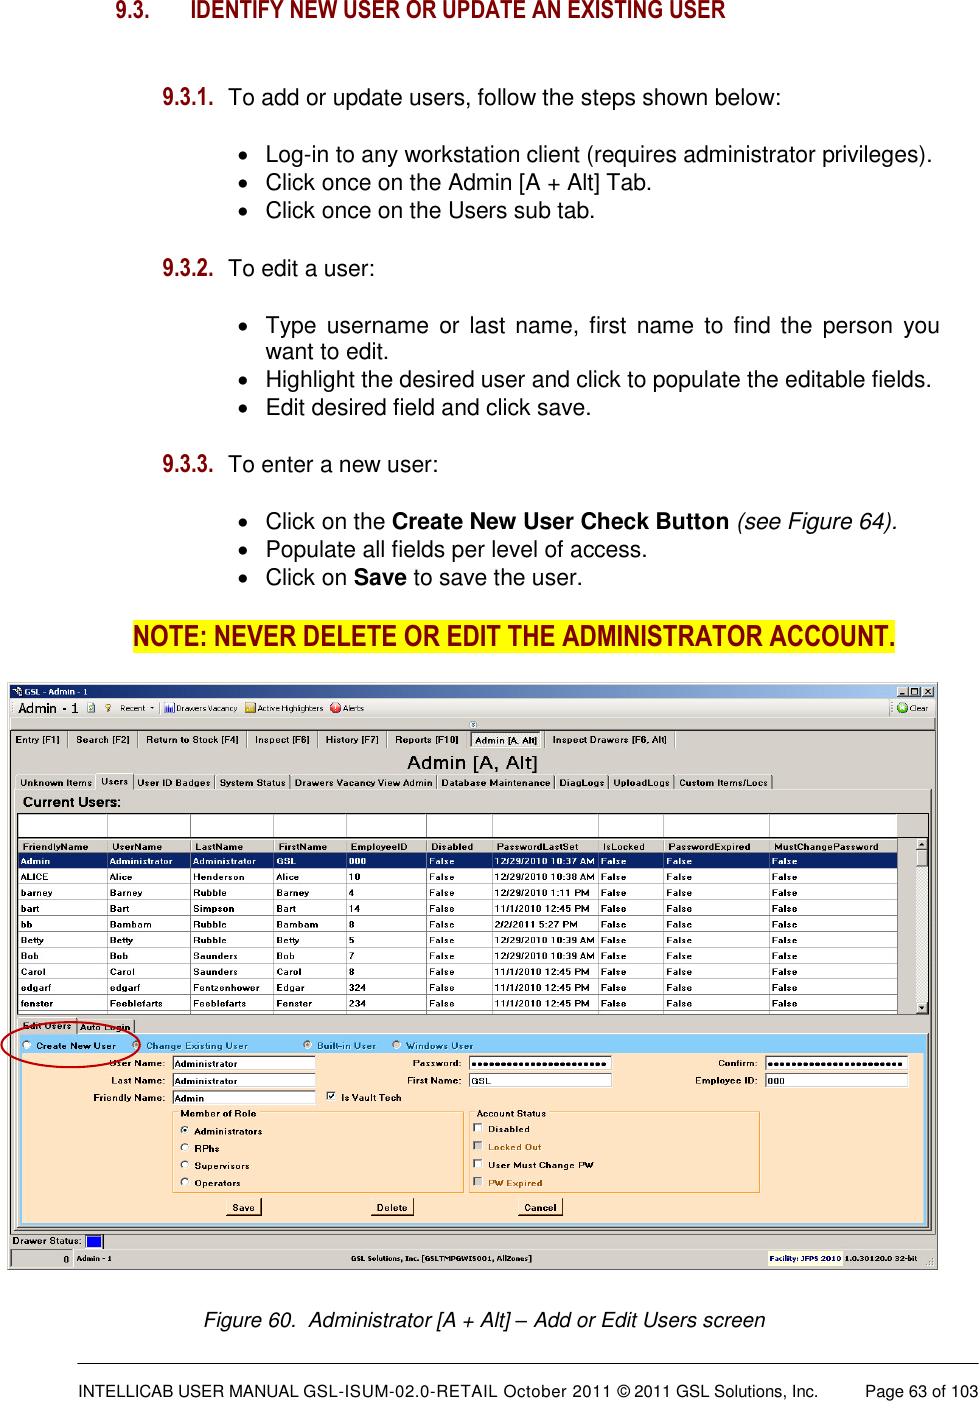  INTELLICAB USER MANUAL GSL-ISUM-02.0-RETAIL October 2011 © 2011 GSL Solutions, Inc.   Page 63 of 103   Figure 60.  Administrator [A + Alt] – Add or Edit Users screen  9.3.   IDENTIFY NEW USER OR UPDATE AN EXISTING USER  9.3.1. To add or update users, follow the steps shown below:   Log-in to any workstation client (requires administrator privileges).   Click once on the Admin [A + Alt] Tab.   Click once on the Users sub tab. 9.3.2. To edit a user:    Type  username  or  last  name,  first  name  to  find the  person  you want to edit.   Highlight the desired user and click to populate the editable fields.   Edit desired field and click save.  9.3.3. To enter a new user:    Click on the Create New User Check Button (see Figure 64).   Populate all fields per level of access.   Click on Save to save the user. NOTE: NEVER DELETE OR EDIT THE ADMINISTRATOR ACCOUNT.  